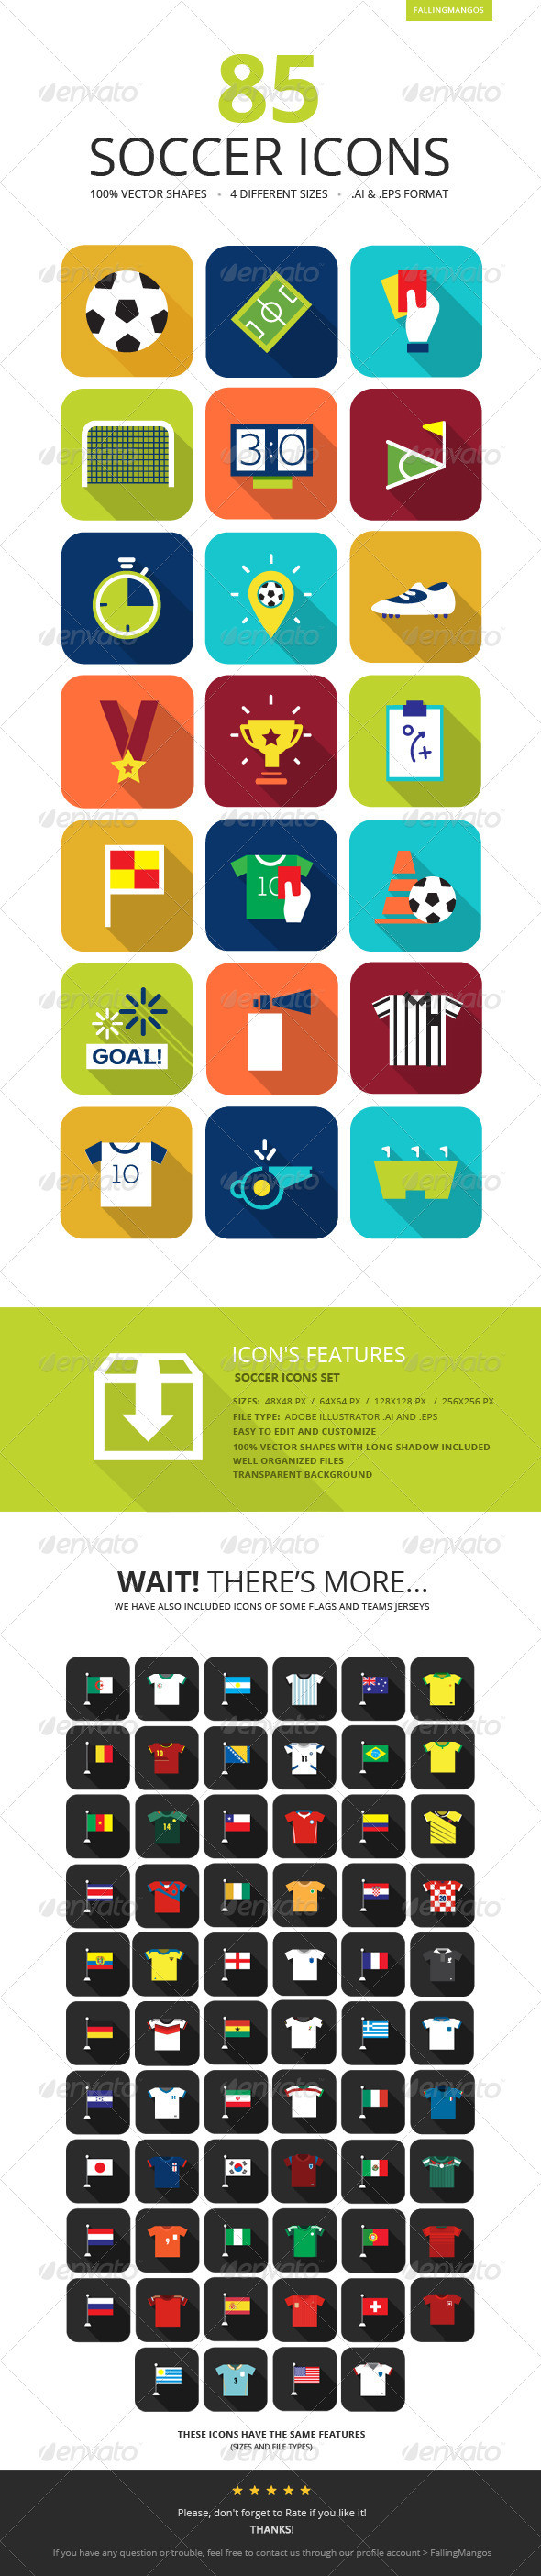 Preview 20image soccer 20icons